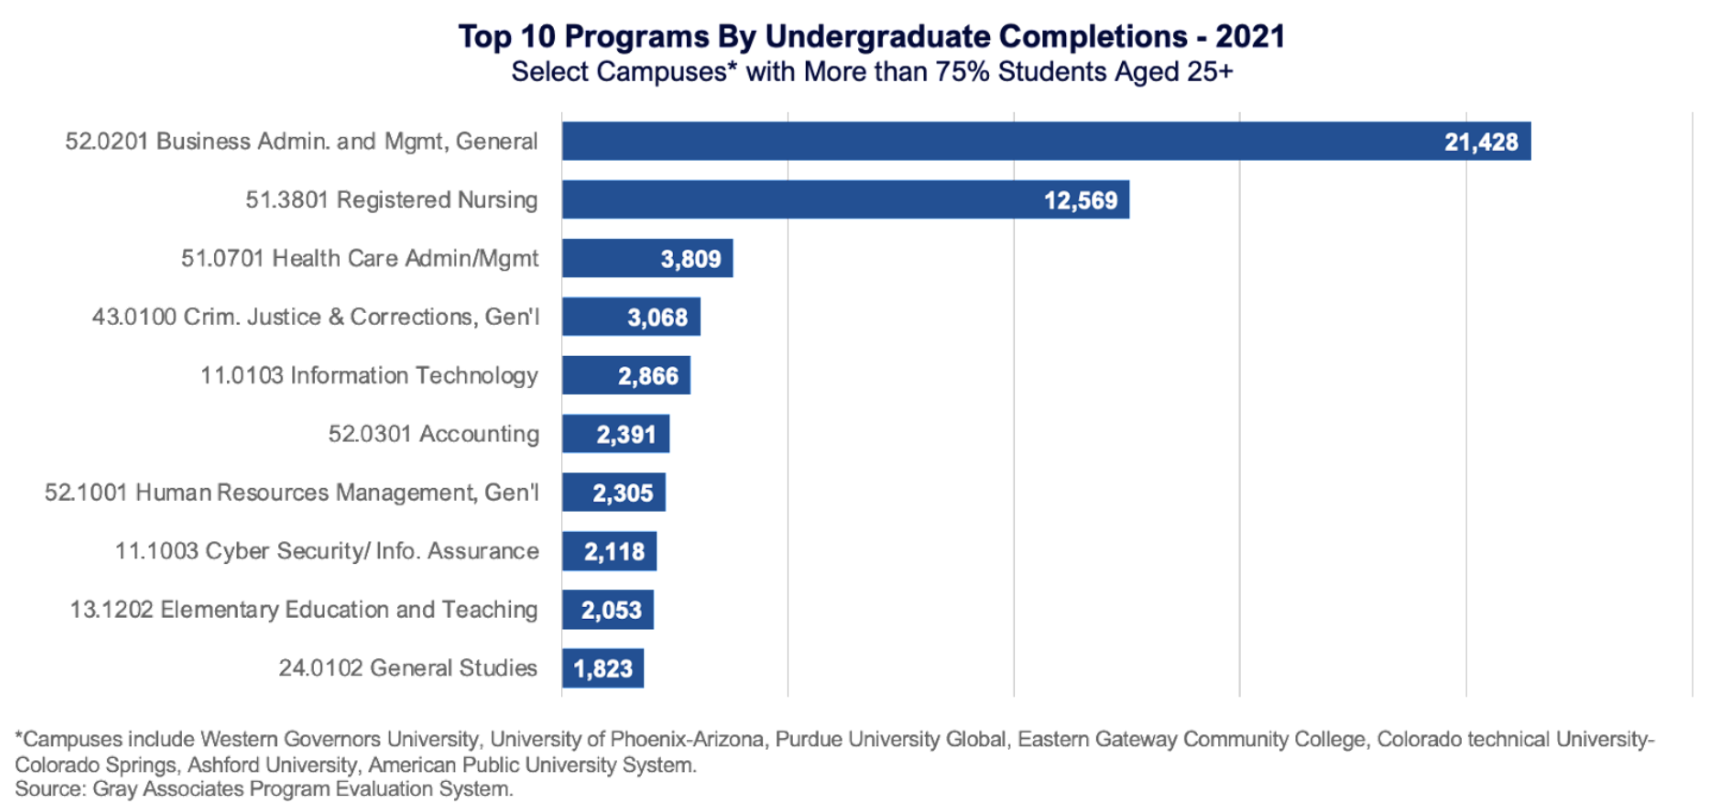 Top 10 Programs By Undergraduate Completions - 2021 (Select Campuses* with More than 75% Students Aged 25+)